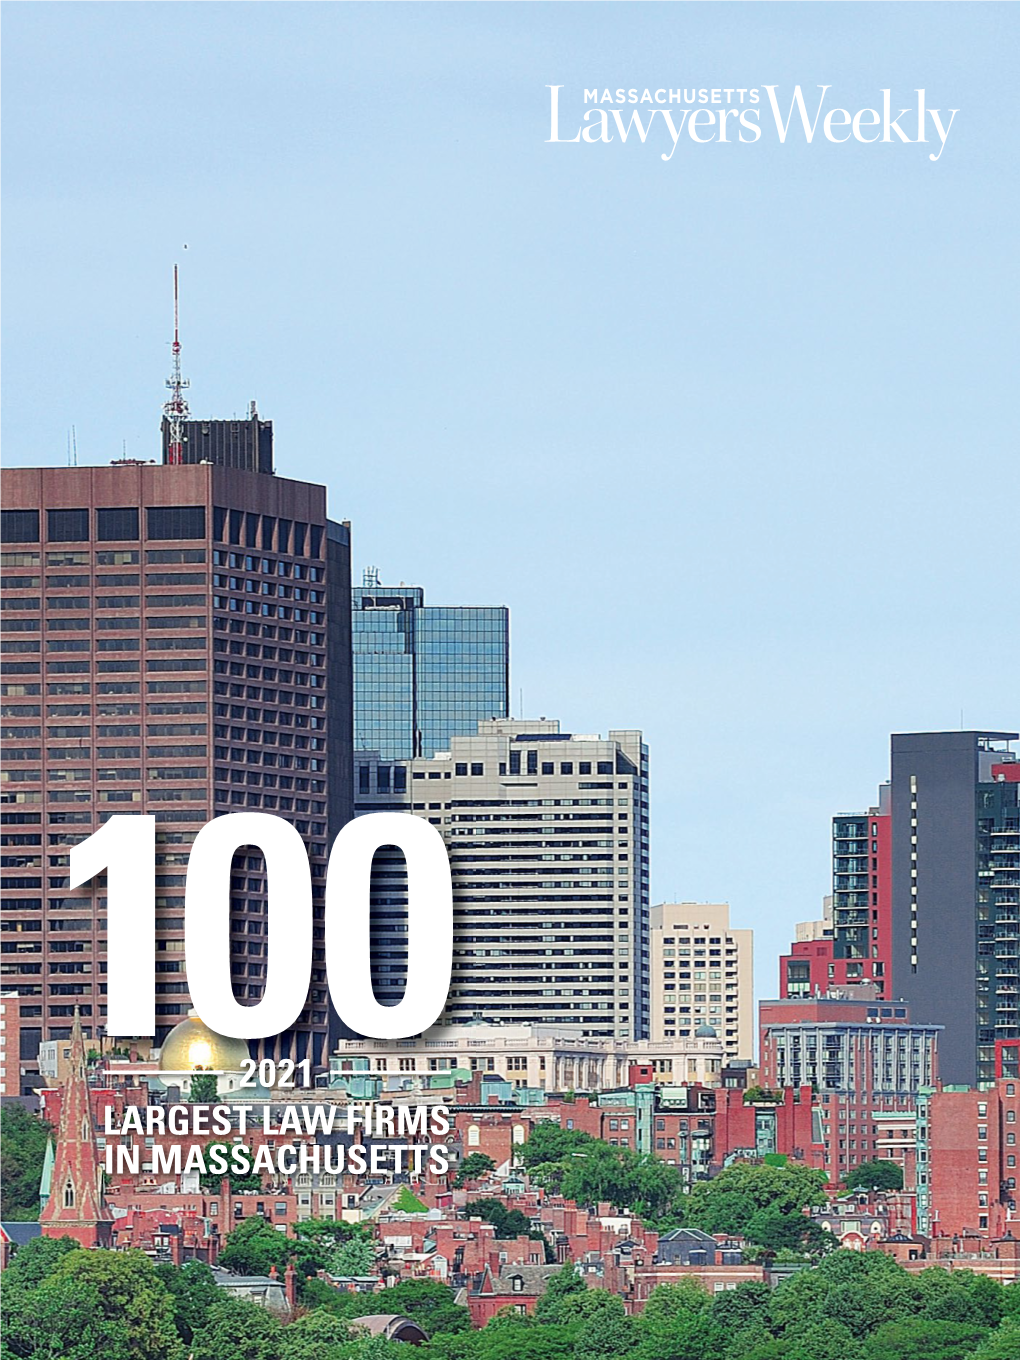 Largest Law Firms in Massachusetts 2021